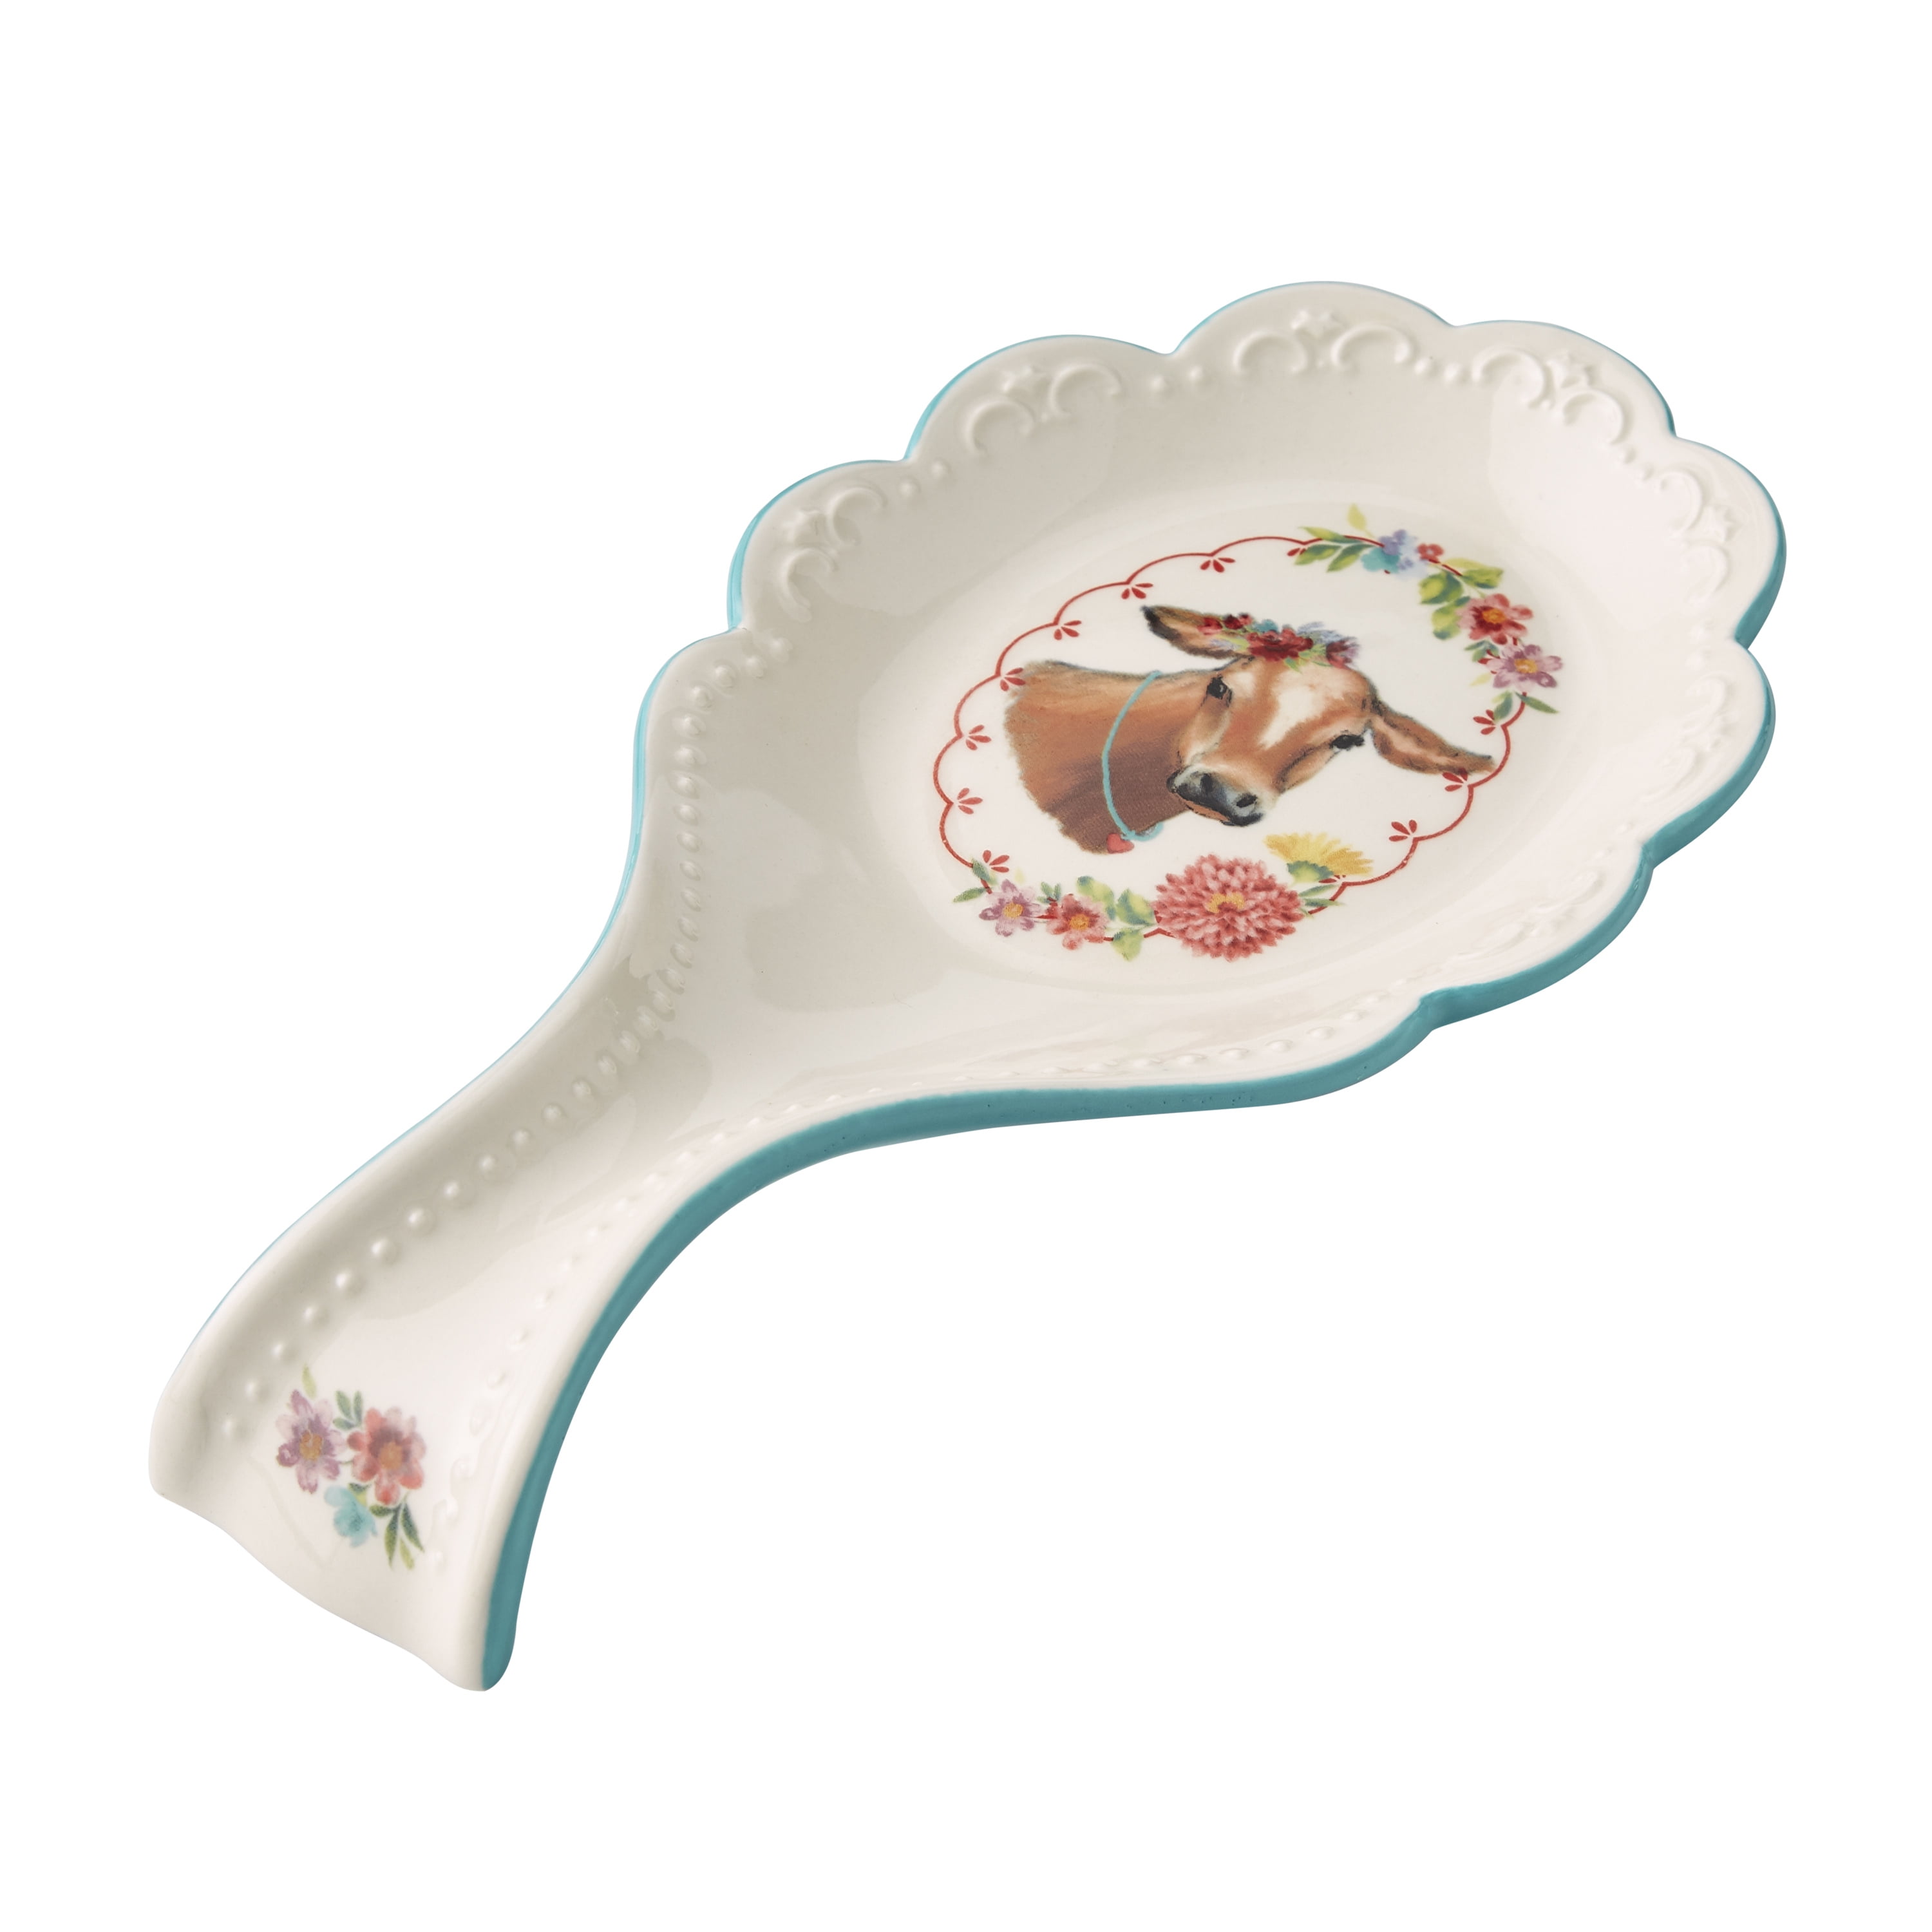 The Pioneer Woman Cow Decal Stoneware Spoon Rest